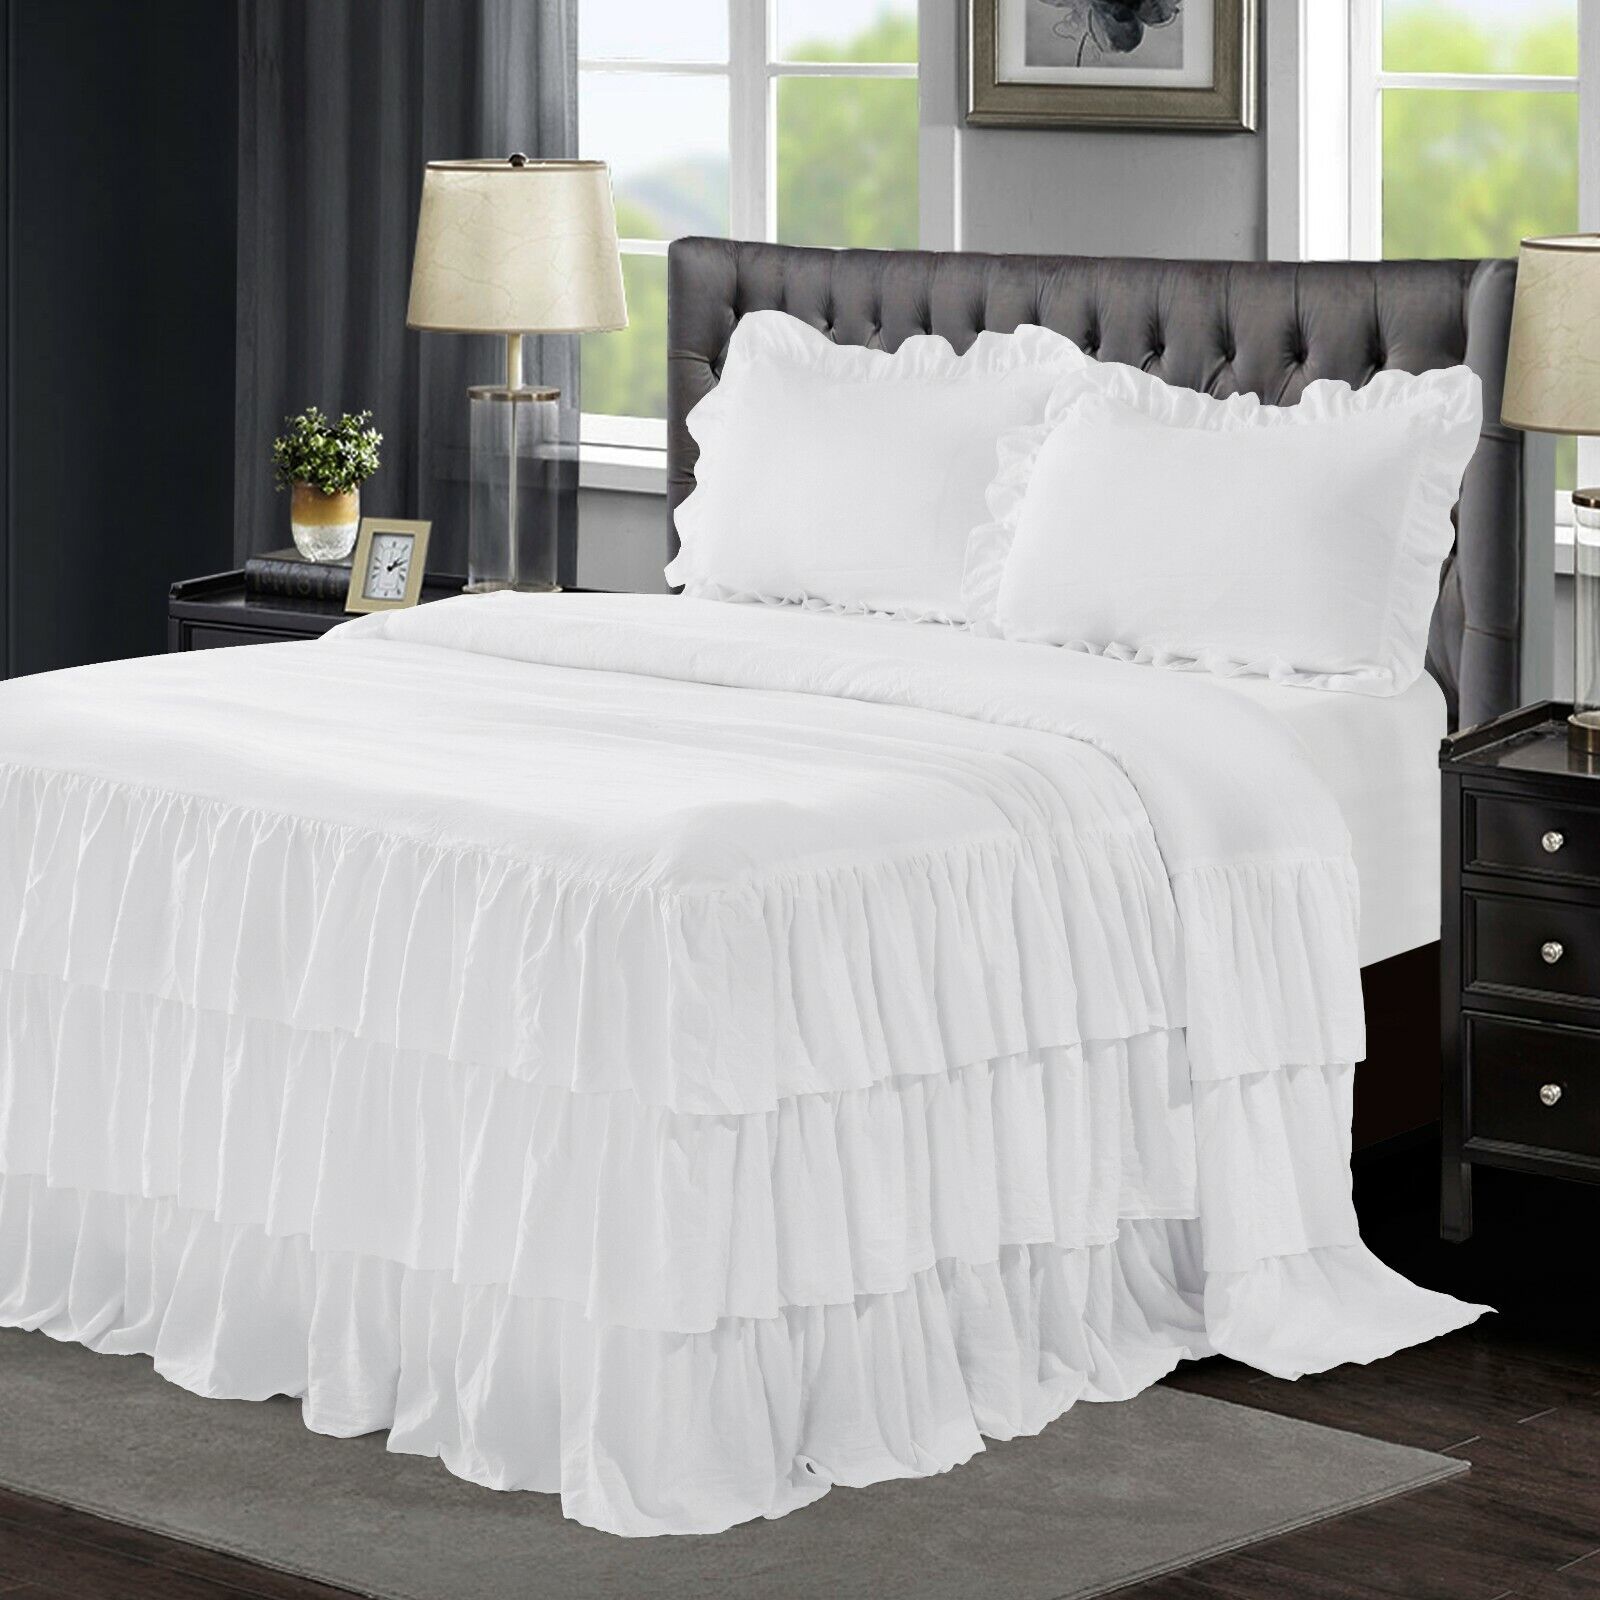 HIG 3 Piece Classic Ruffle Skirt Bedspread Set 30 inches Drop White- Farmhouse